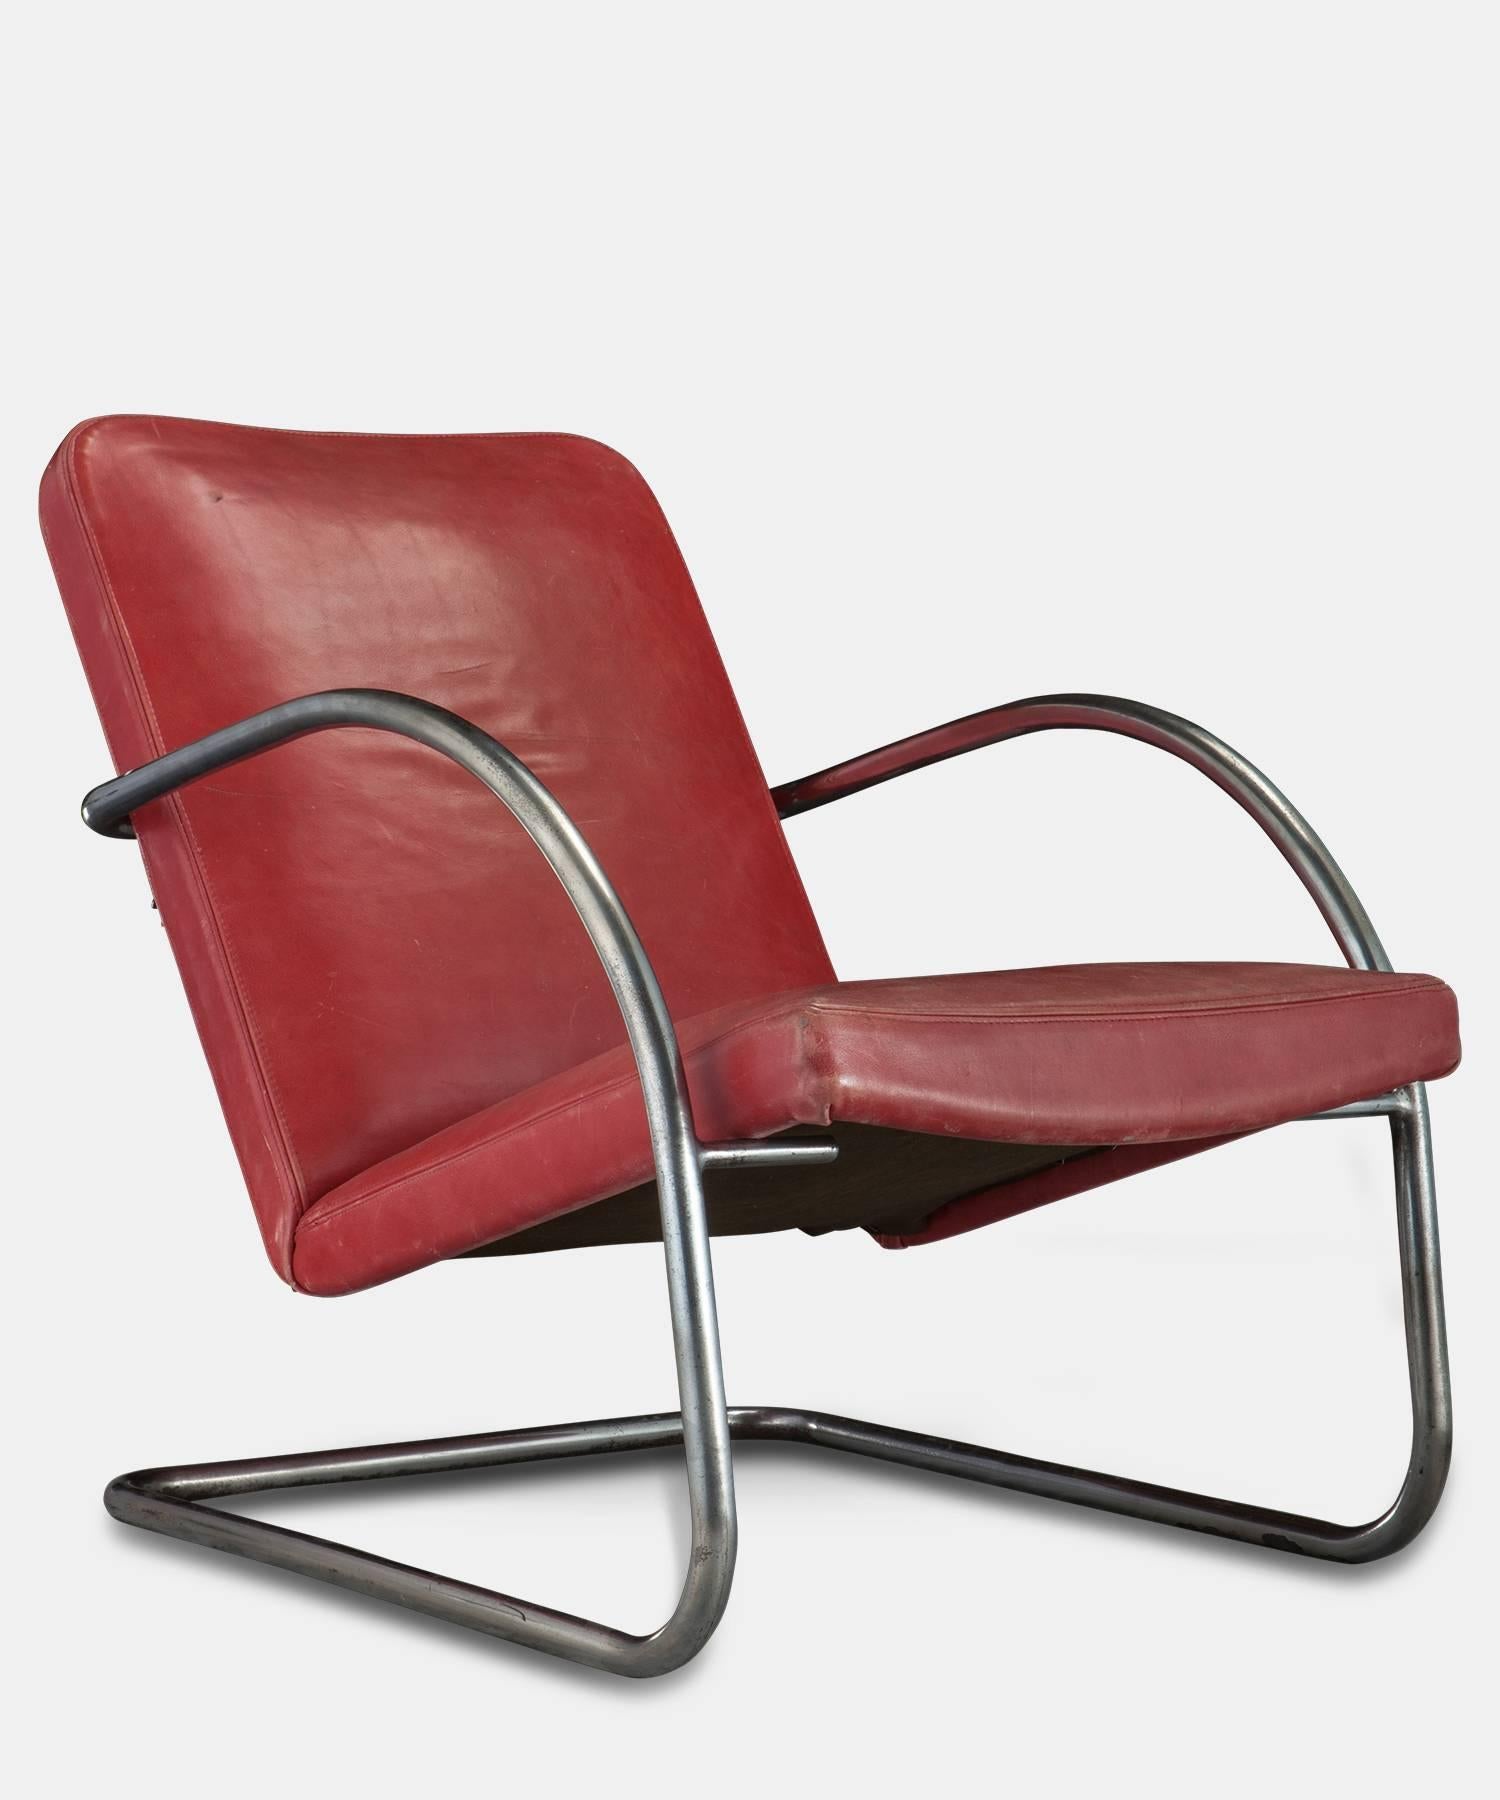 Chrome and Red Leather Lounge Chair, France, circa 1950

Original leather upholstery with cantilever base.